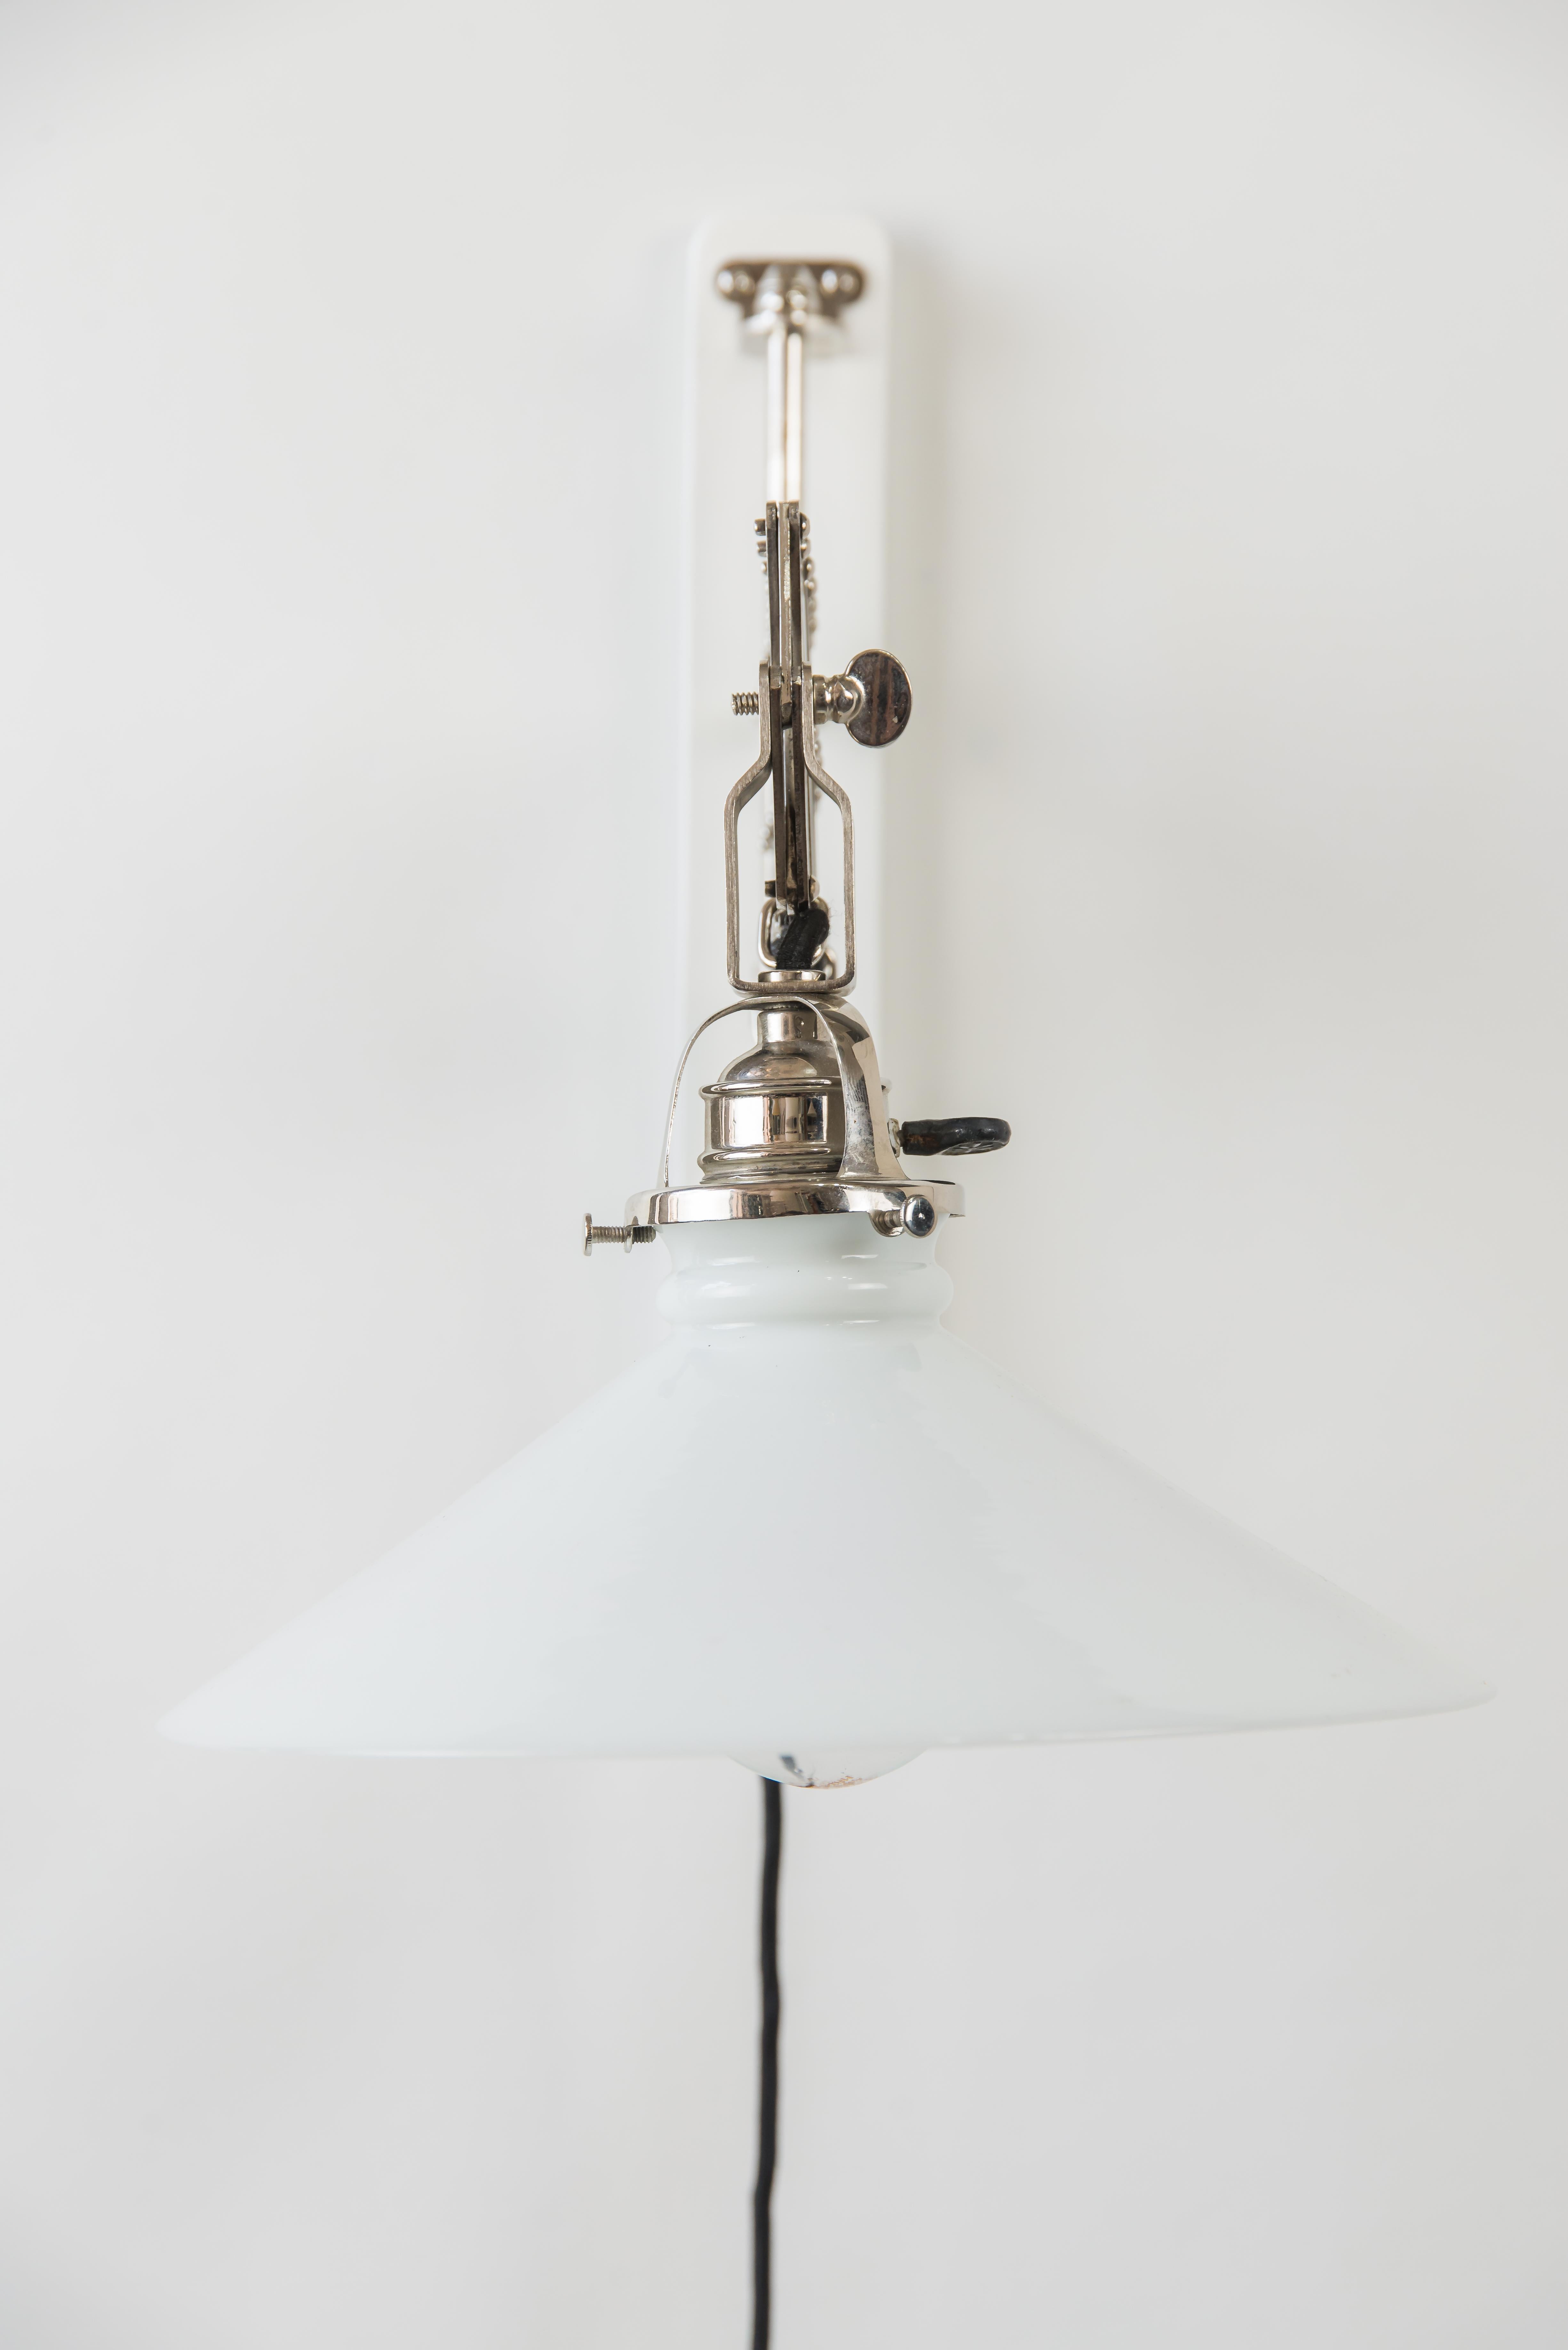 Art Deco swivelling and extendable nickel wall lamp with glass shade, circa 1920s
Original condition
Extendable from 31cm up to 75cm.